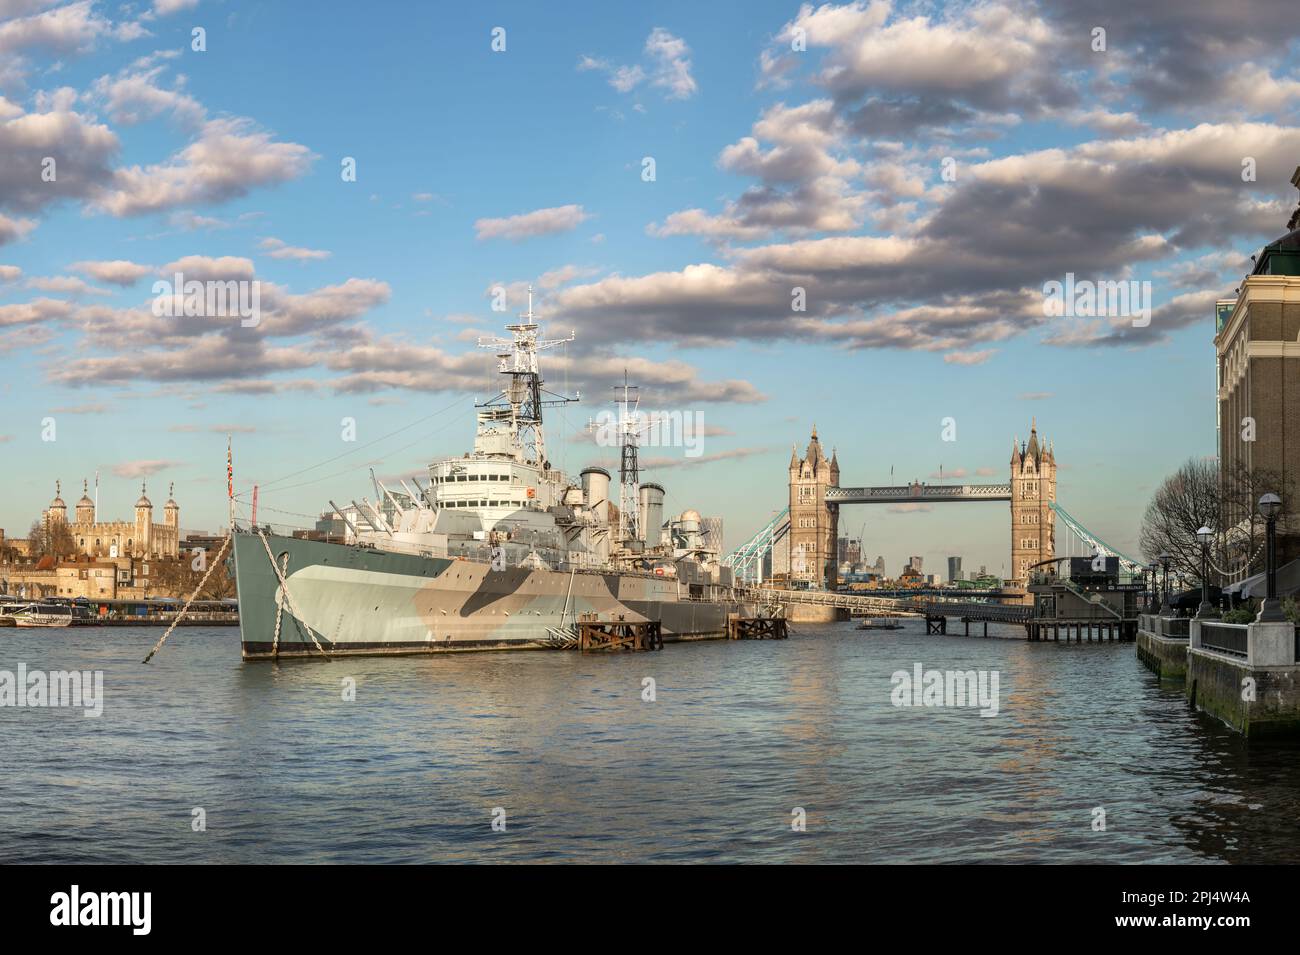 HMS Belfast moored on the River Thames alongside The Queens Walk in the Pool of London, Southwark. HMS Belfast is a Town-Class light cruiser that was Stock Photo